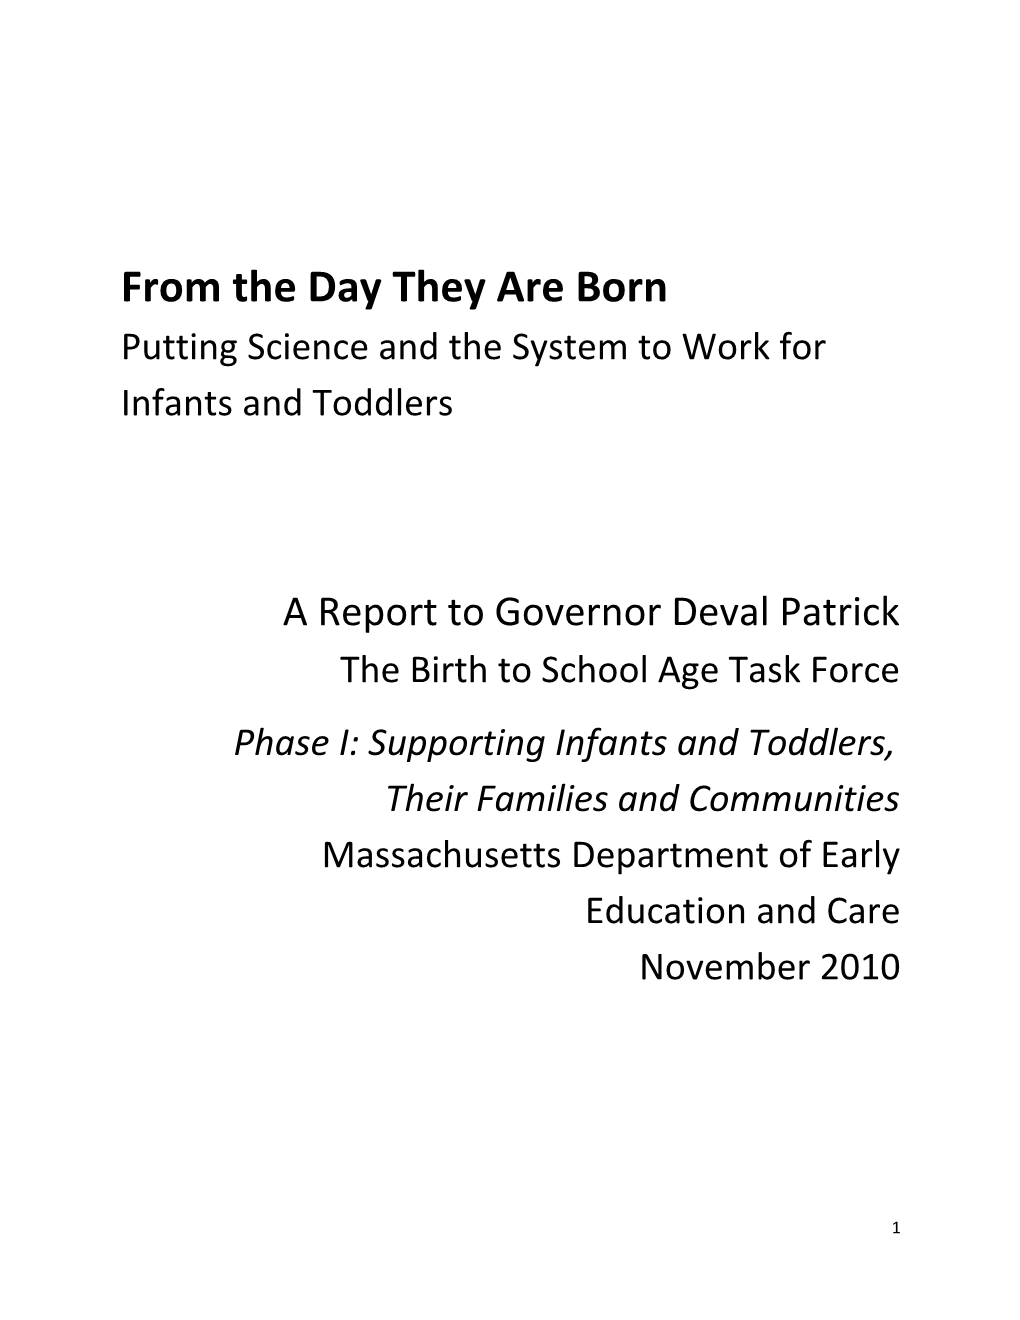 From the Day They Are Born Putting Science and the System to Work for Infants and Toddlers